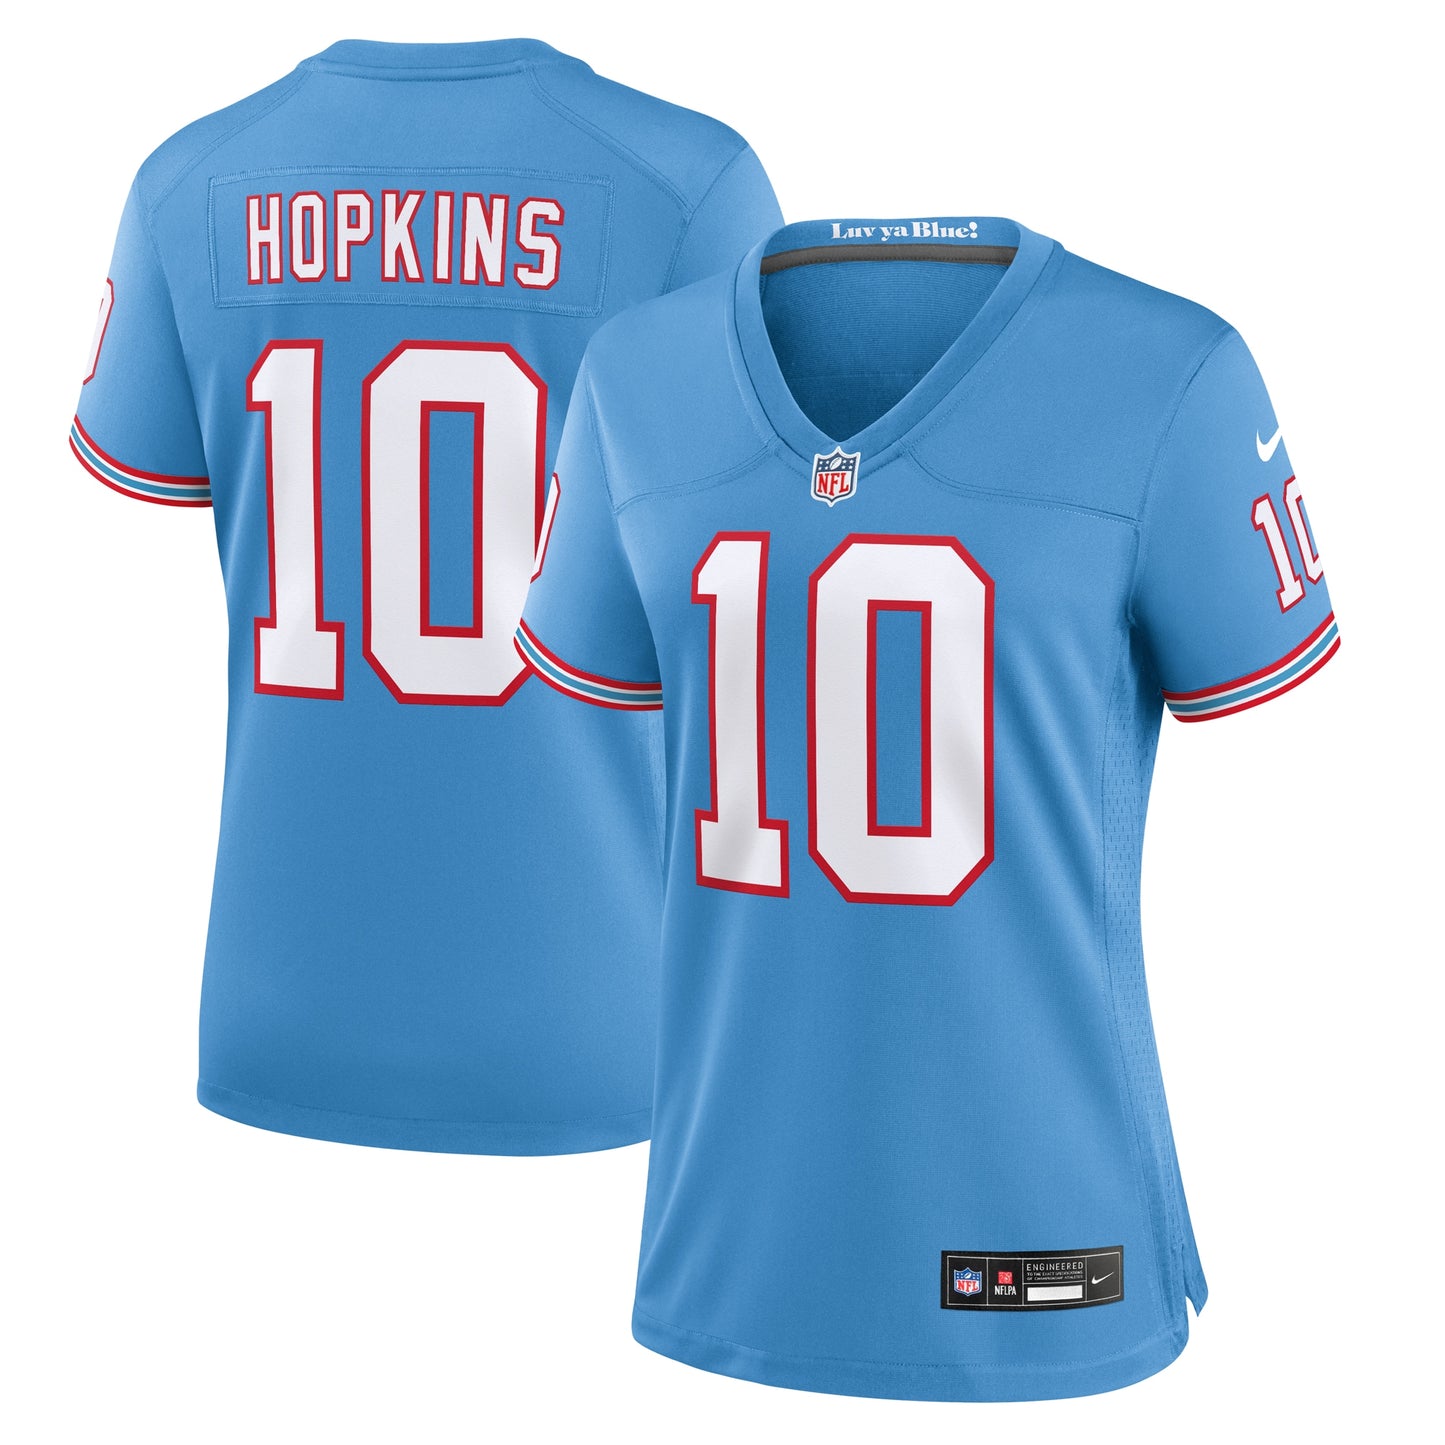 DeAndre Hopkins Tennessee Titans Nike Women's Oilers Throwback Player Game Jersey - Light Blue